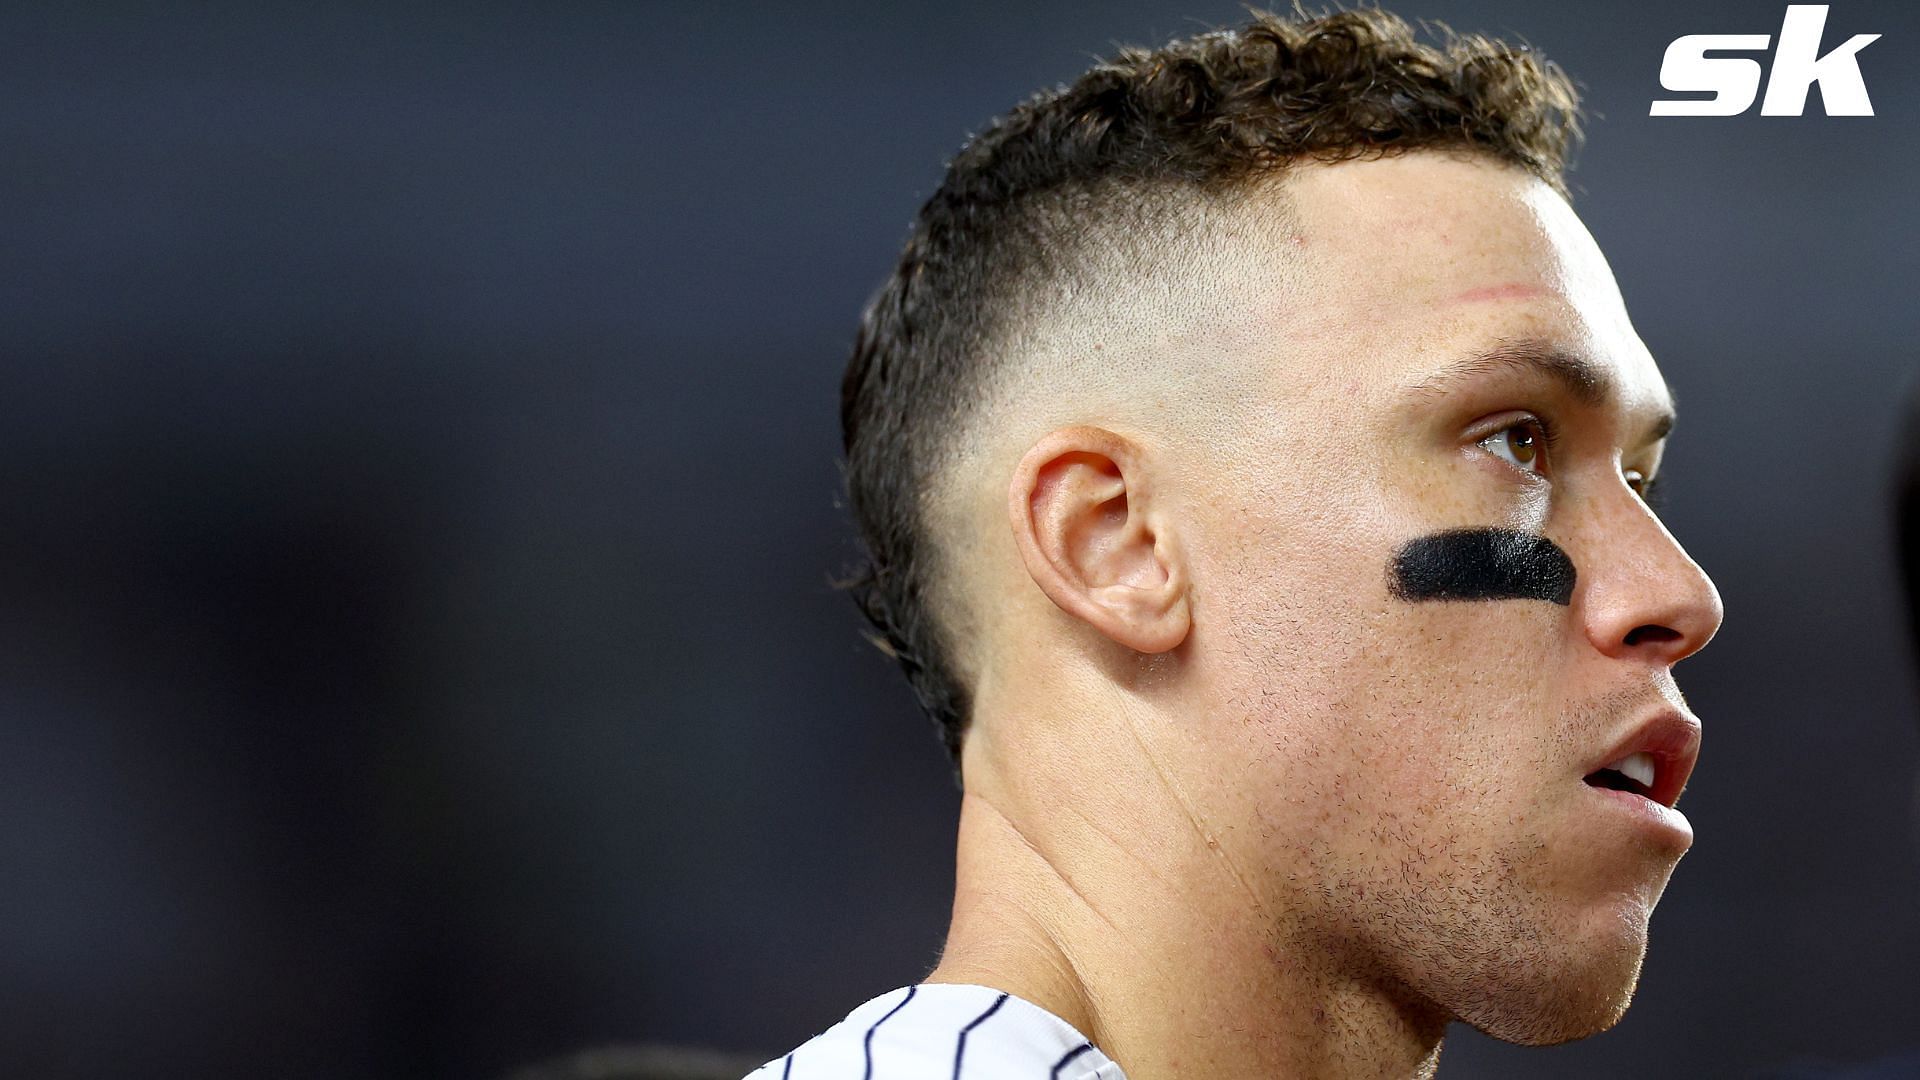 Aaron Judge is on course to break multiple MLB records with the Yankees this season